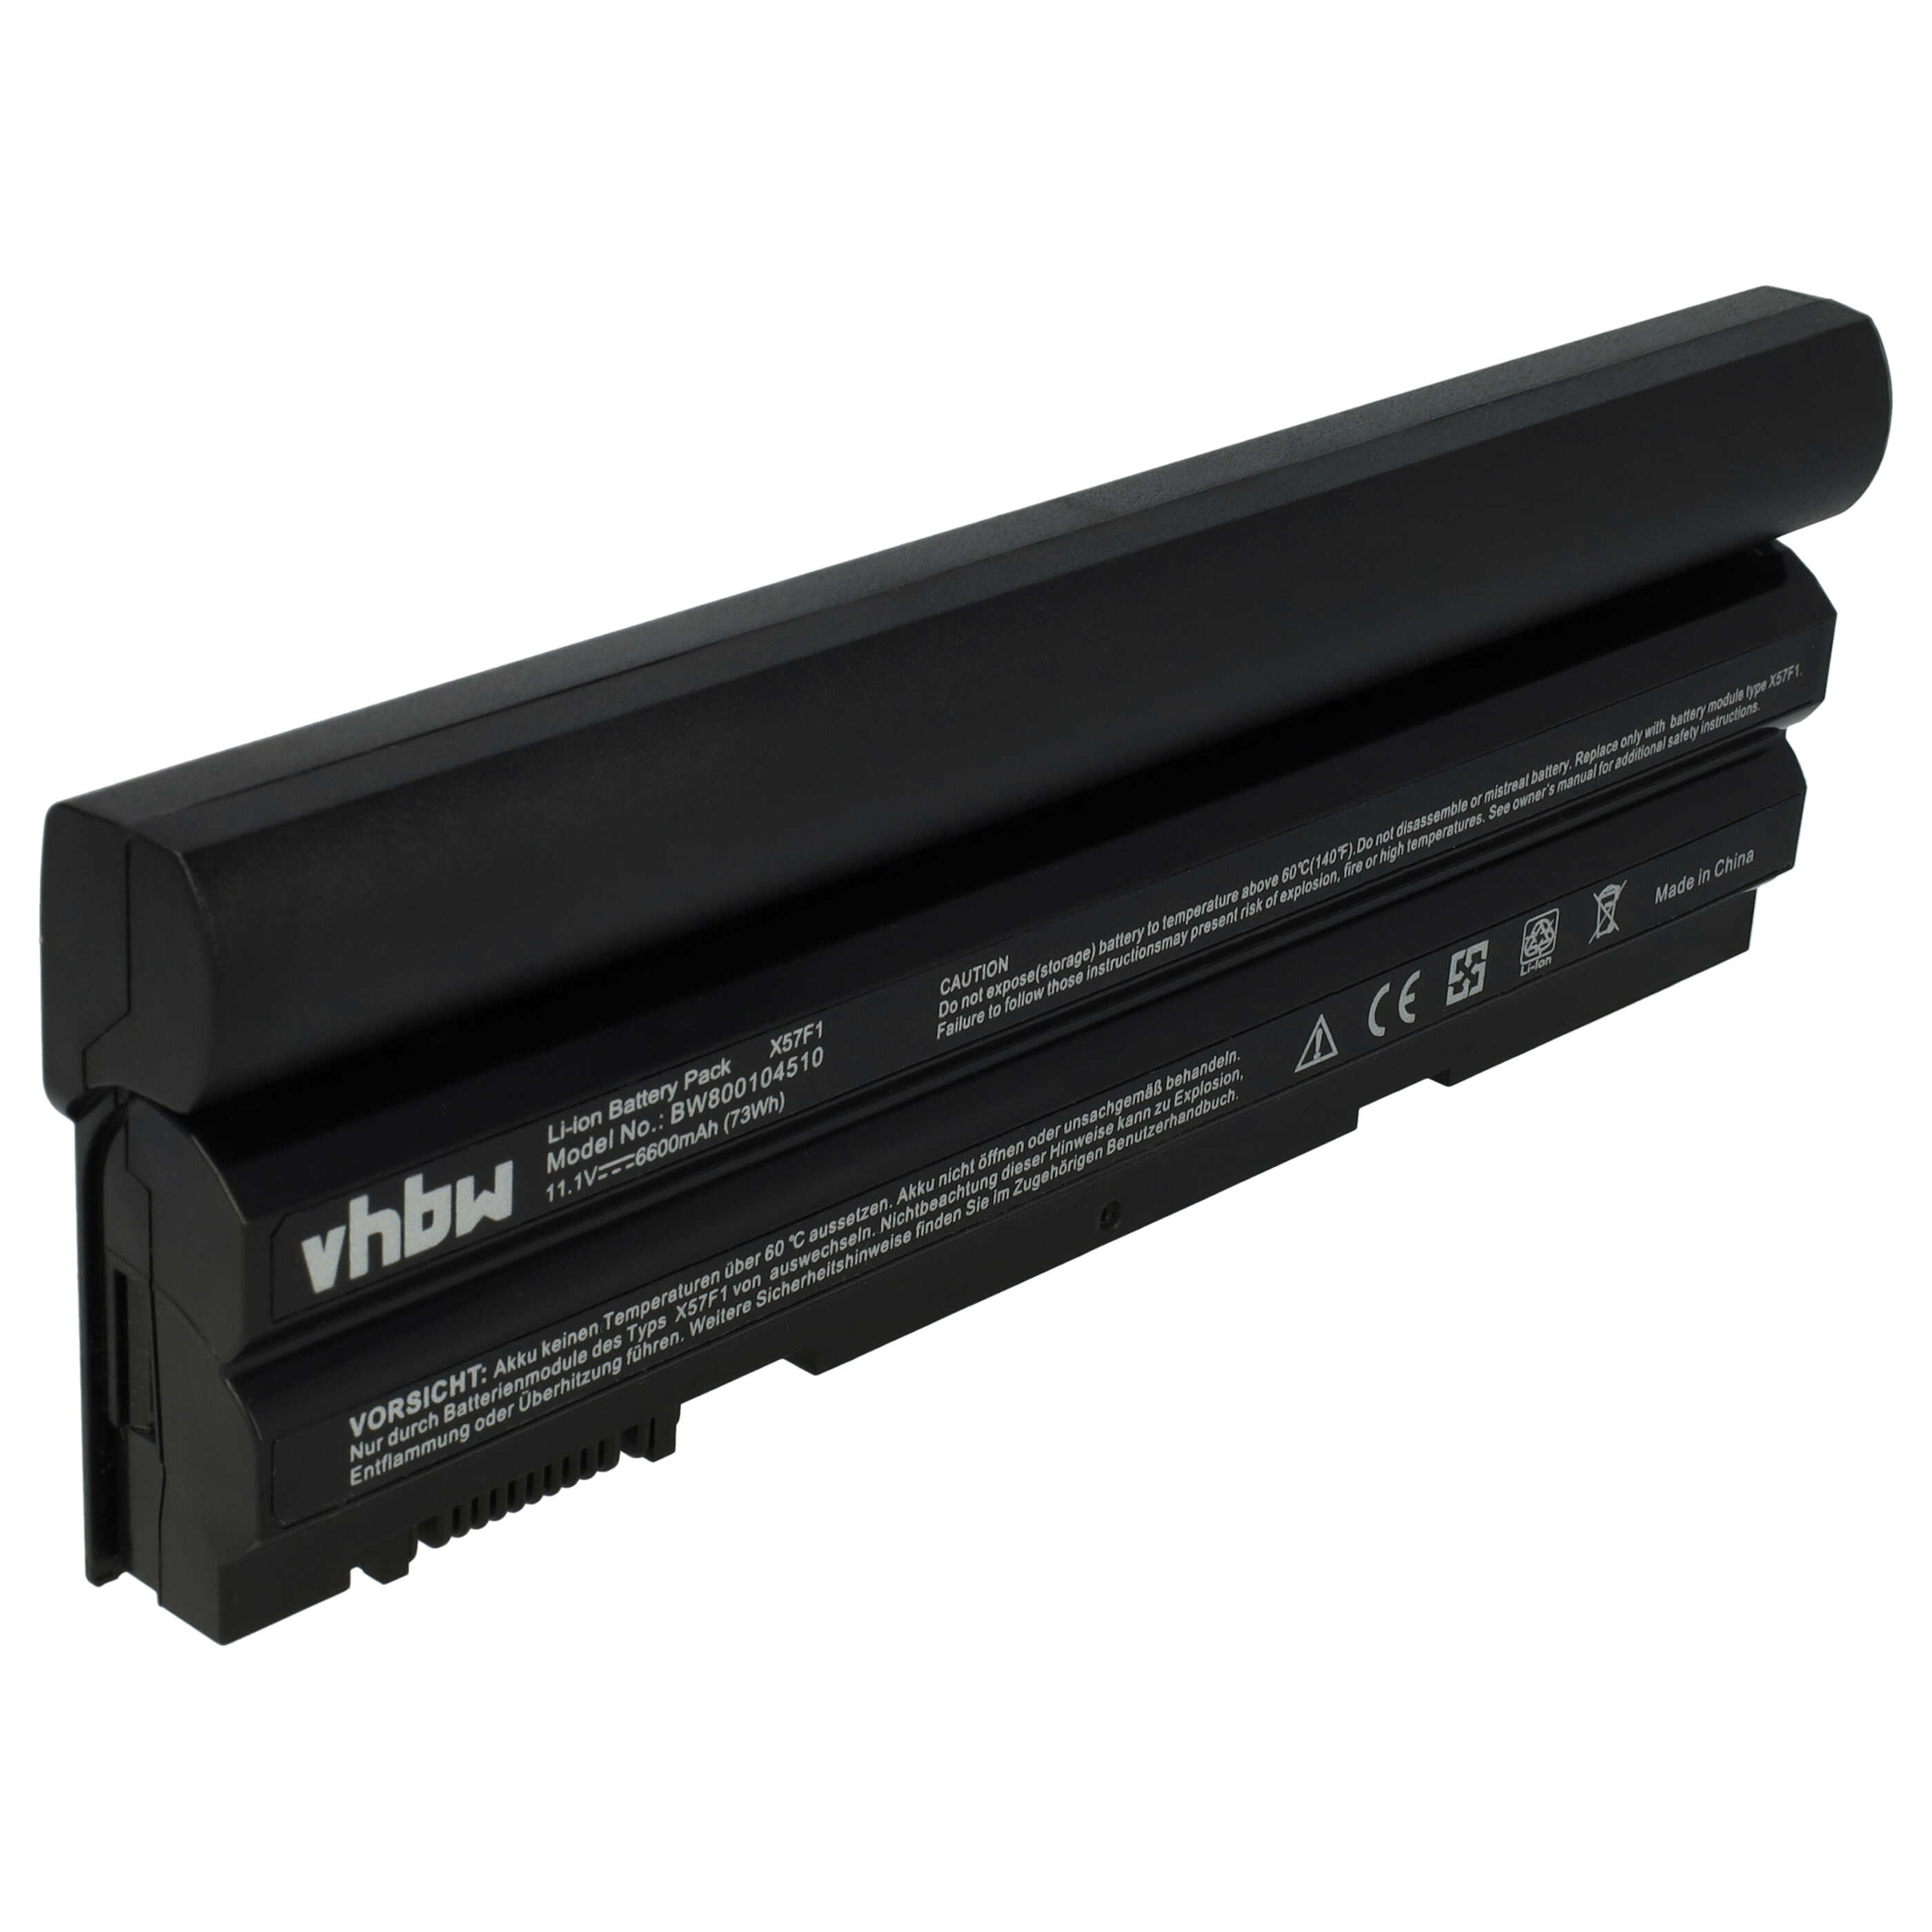 Notebook Battery Replacement for Dell 2P2MJ, 04NW9, 0DTG0V, 05G67C, 312-1163 - 6600mAh 11.1V Li-Ion, black